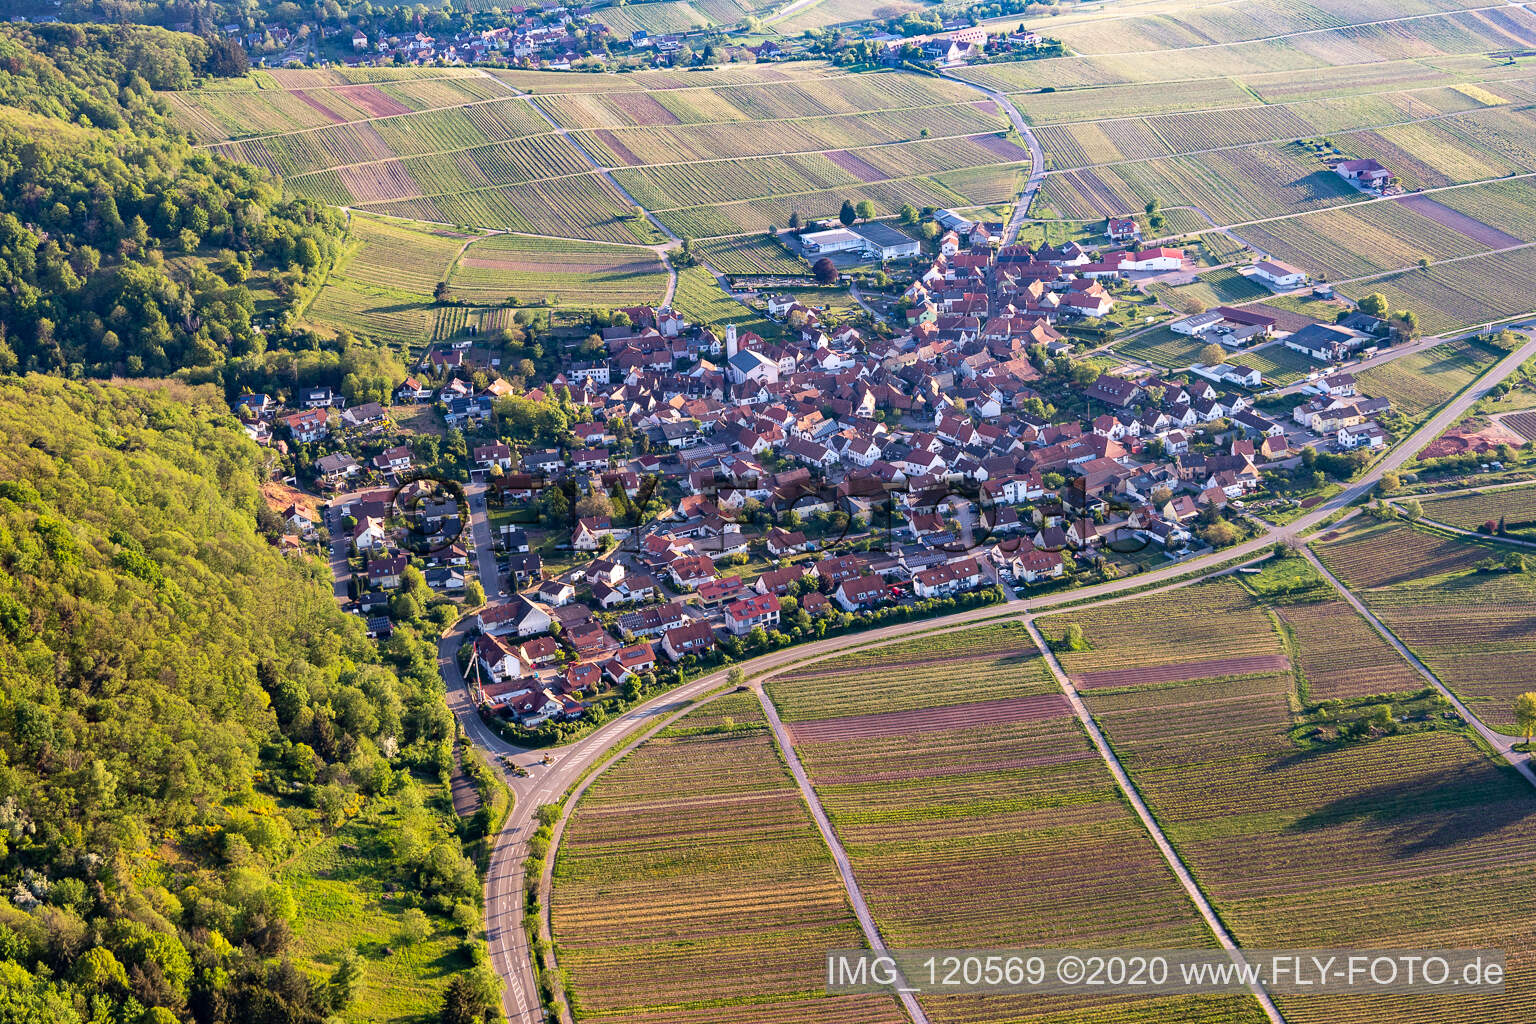 Eschbach in the state Rhineland-Palatinate, Germany from the drone perspective